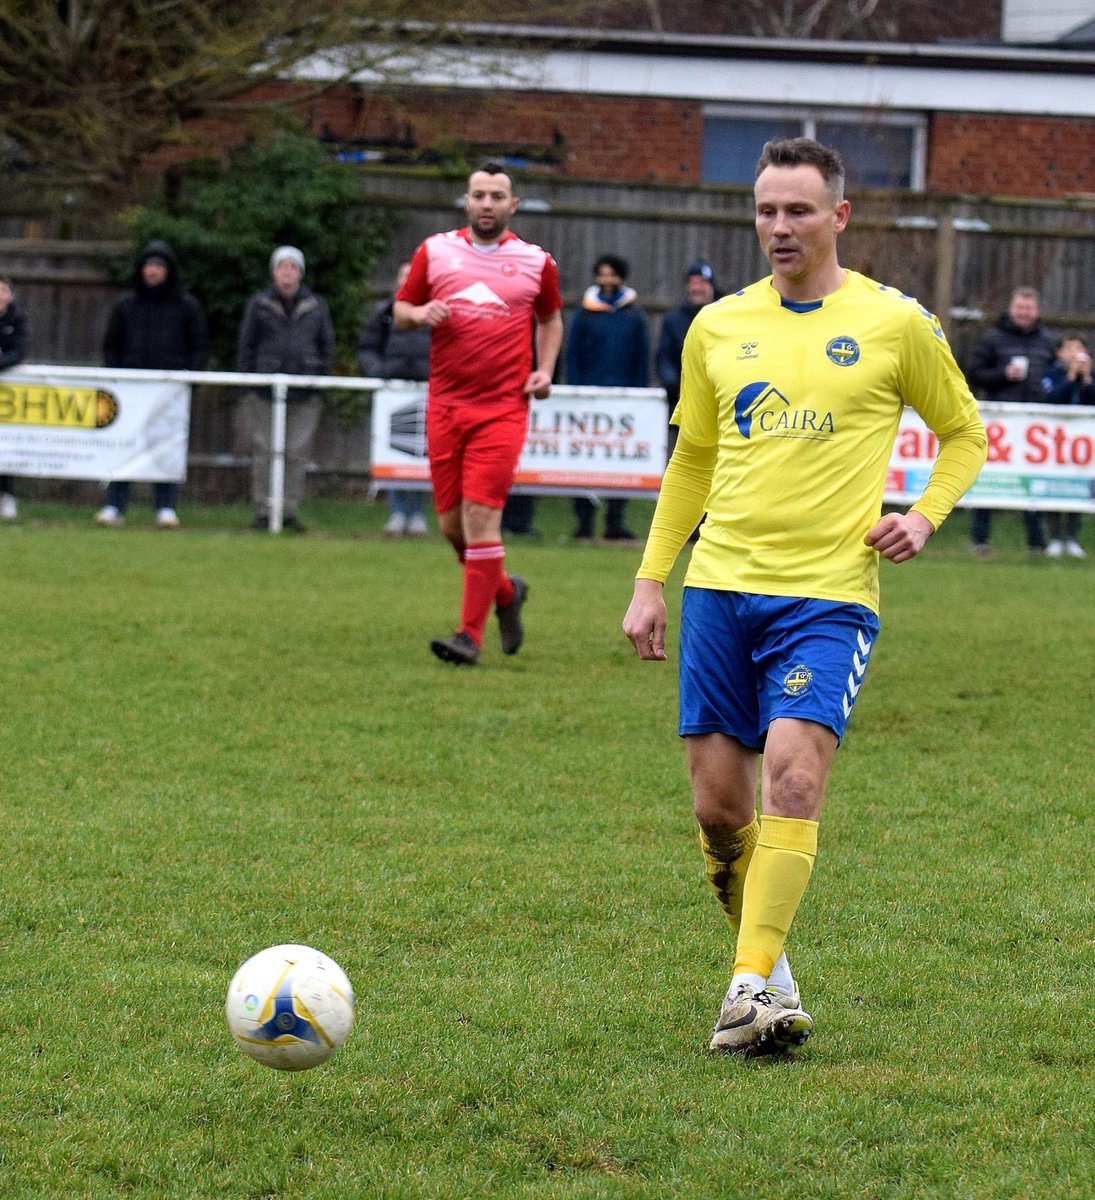 𝑀𝑎𝑑𝑒 𝑖𝑛 𝐴𝑏𝑖𝑛𝑔𝑑𝑜𝑛 💛💙

Our @aldersecurity Man of the Match from Tuesdays @clannyfc game @Official_MattT  👏